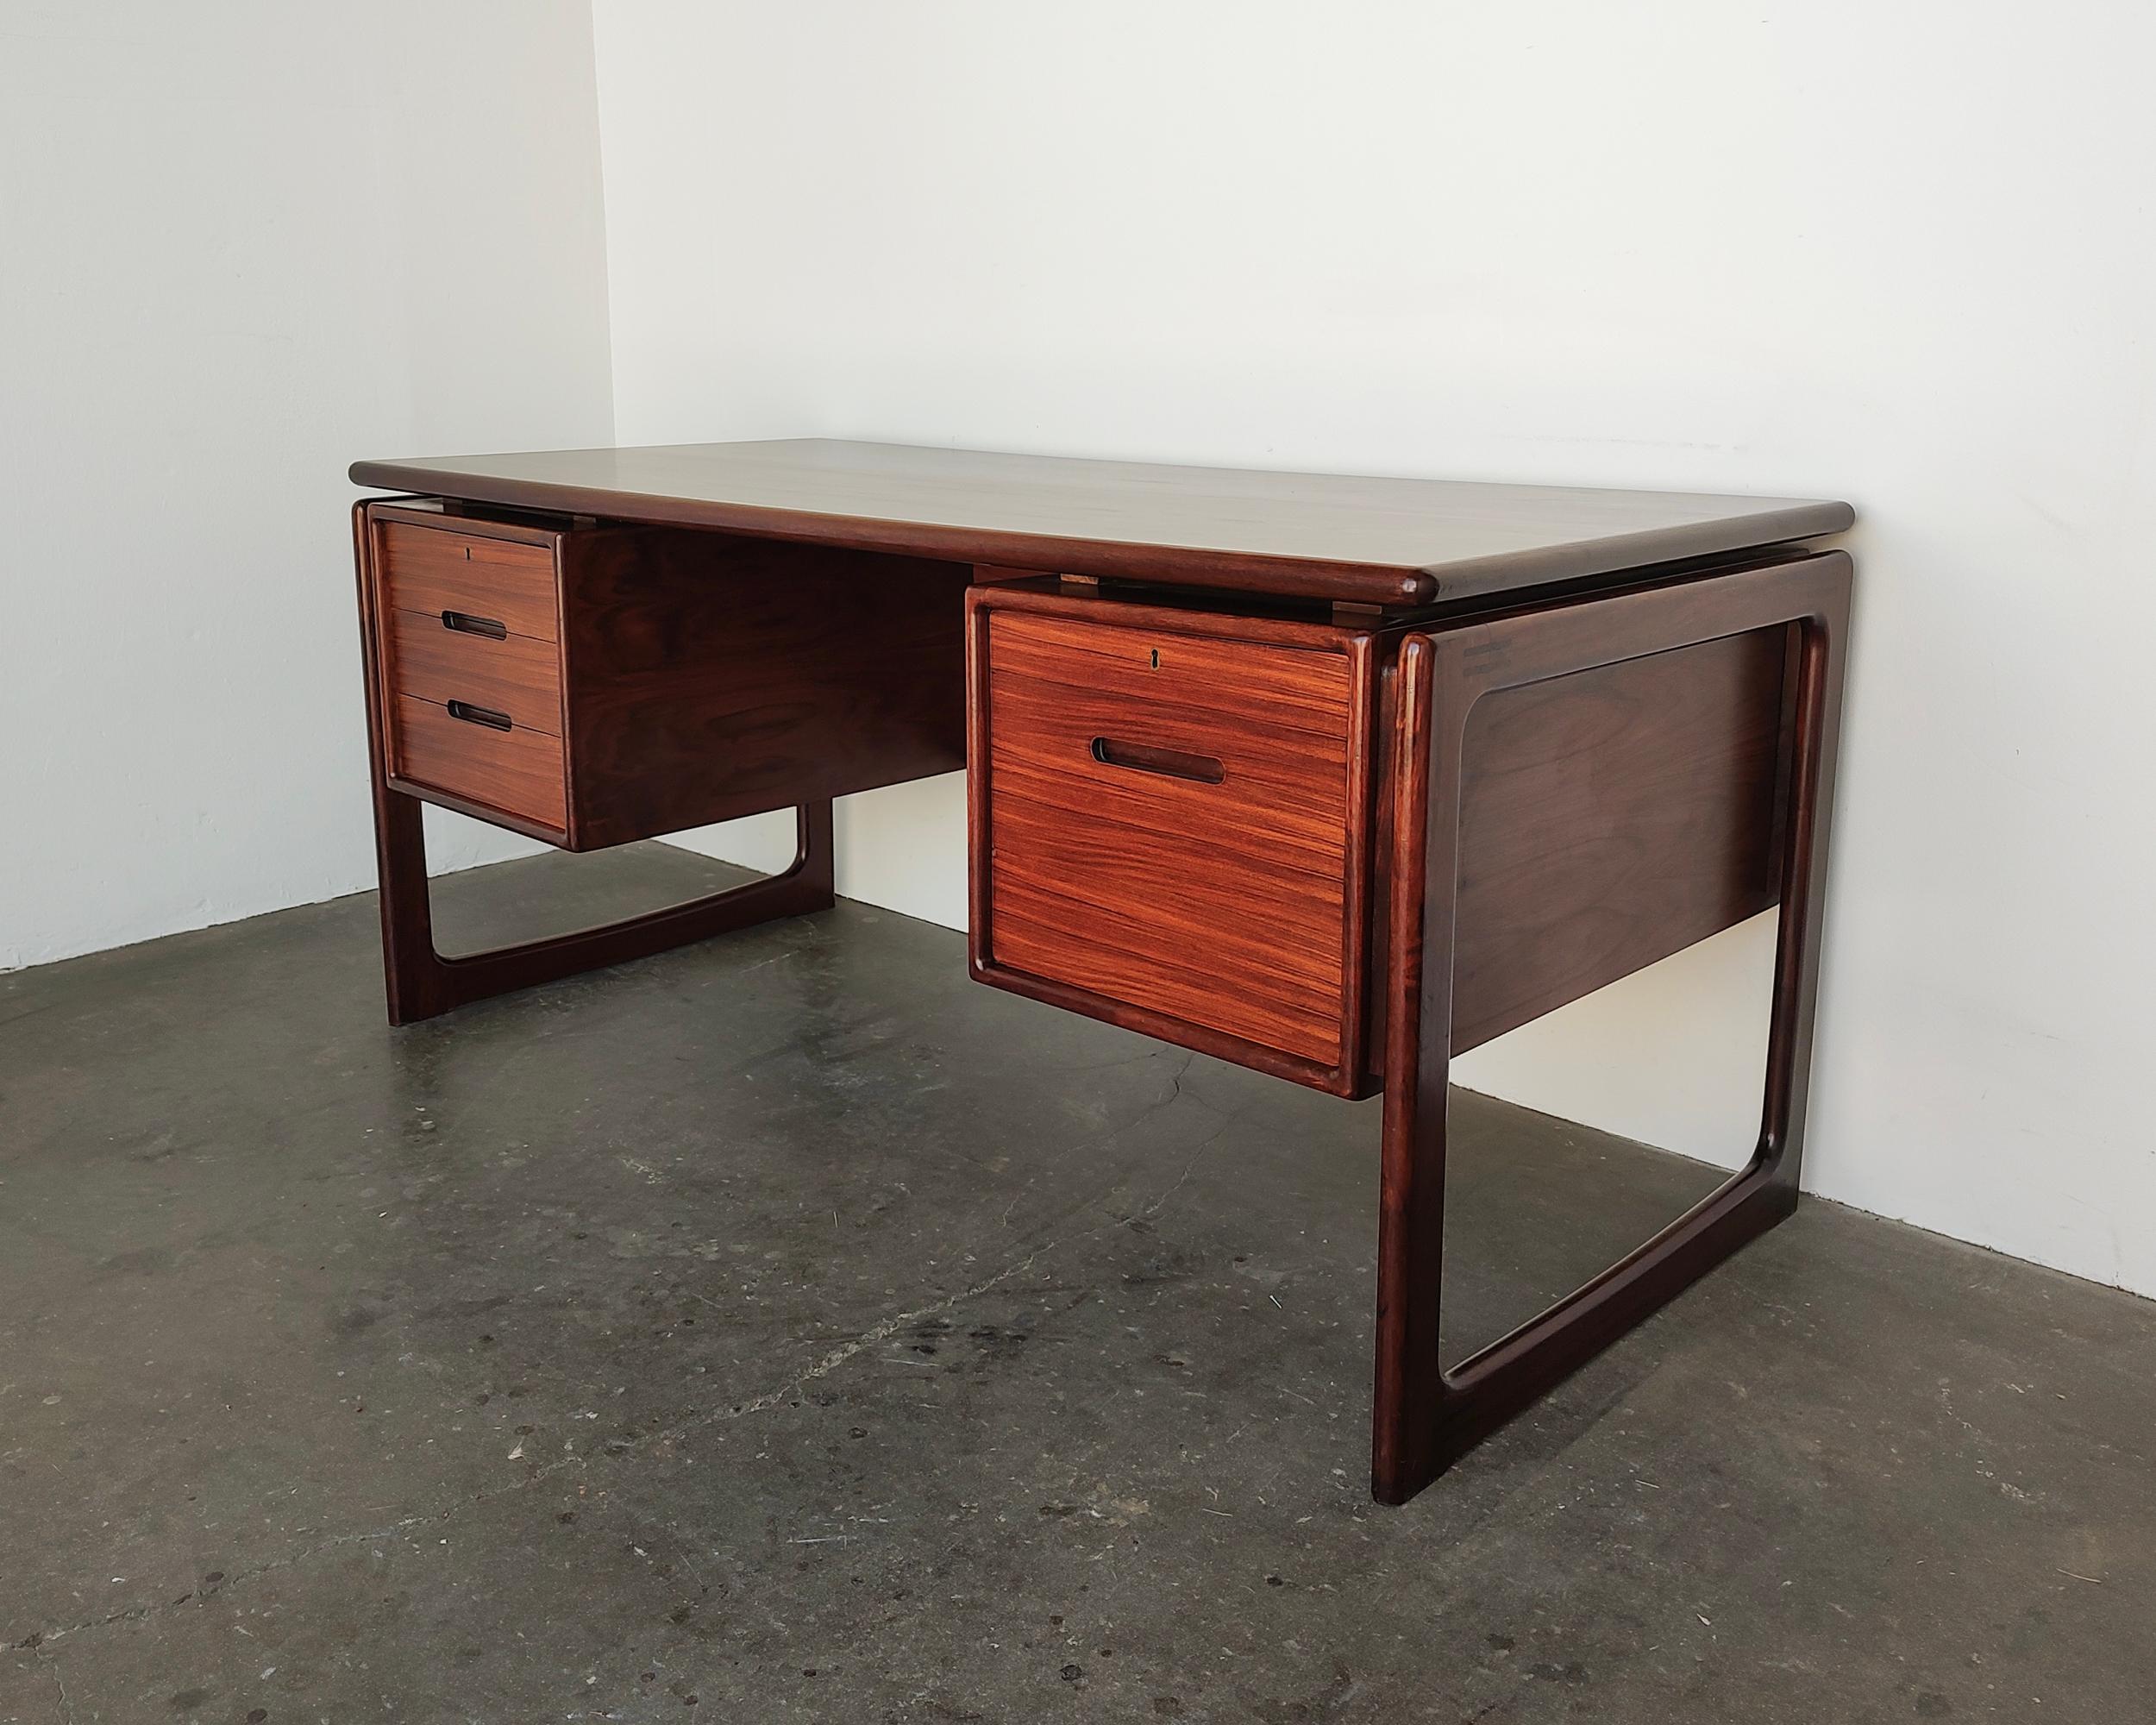 Danish mid-century rosewood desk by Dyrlund circa 1970s. Beautiful rosewood grain covering entire pieces, with solid sled legs and recessed pulls. Backside features built-in open shelf cubbies. Overall great vintage condition, some light fading on